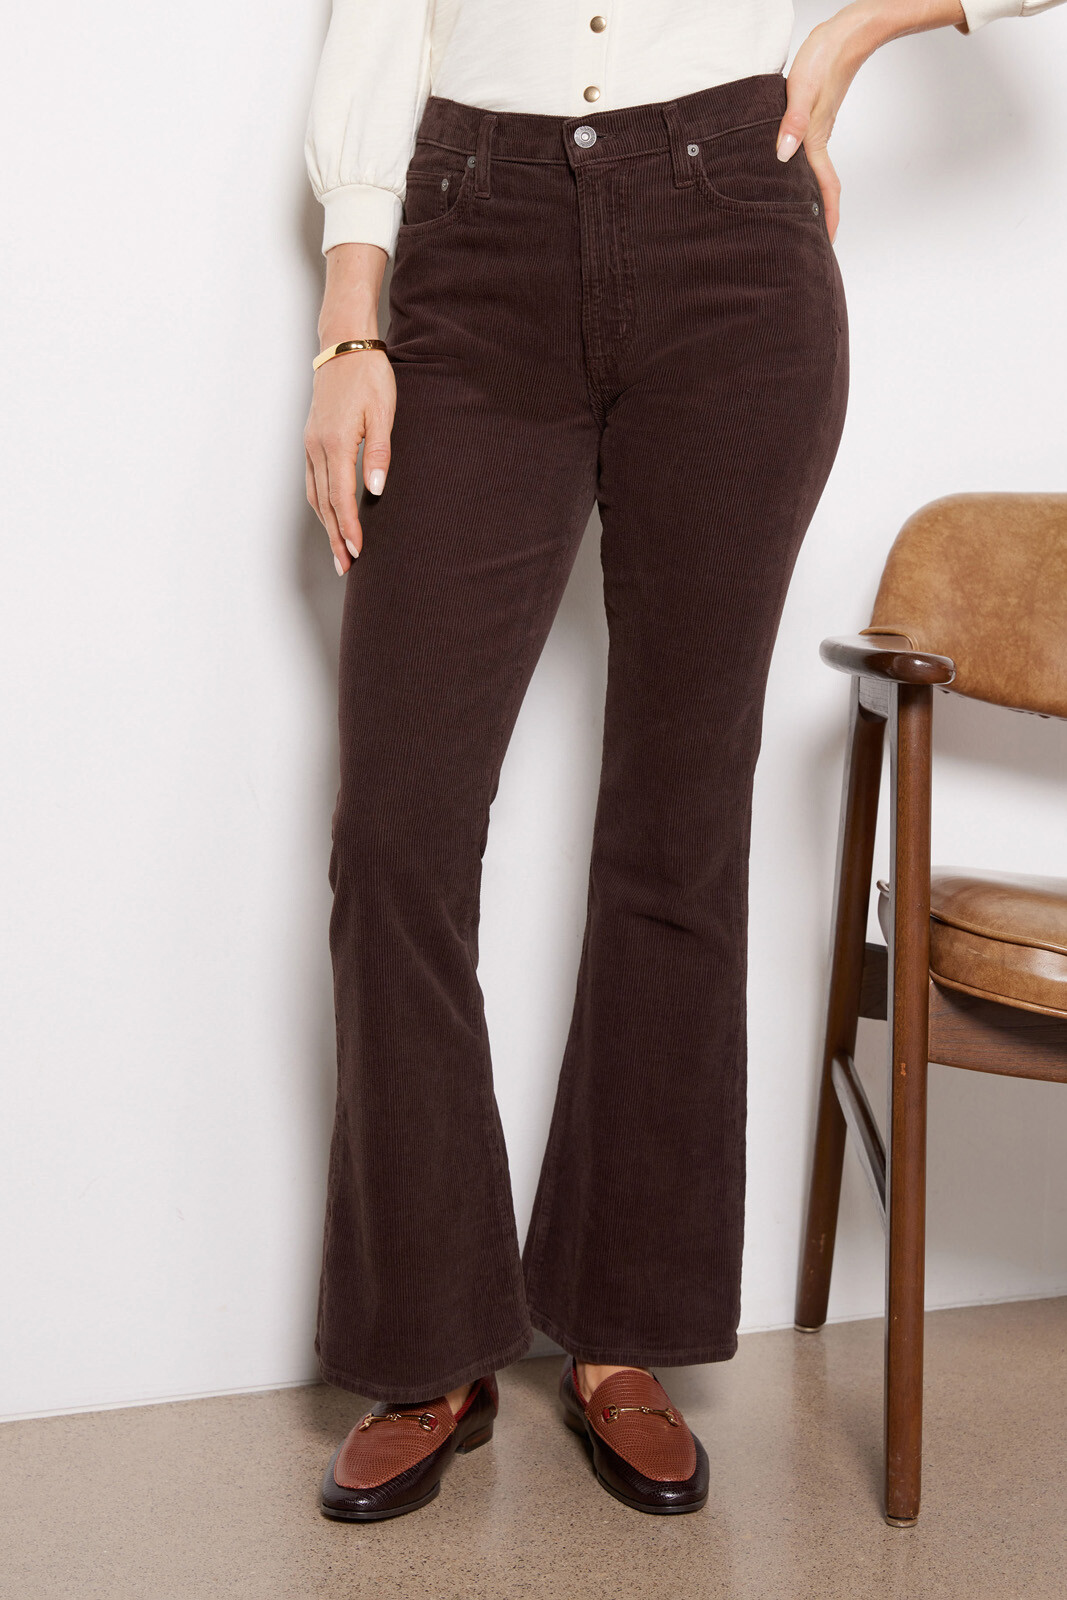 Citizens of Humanity Chloe Mid Rise Super Flare Corduroy Pants Size 30